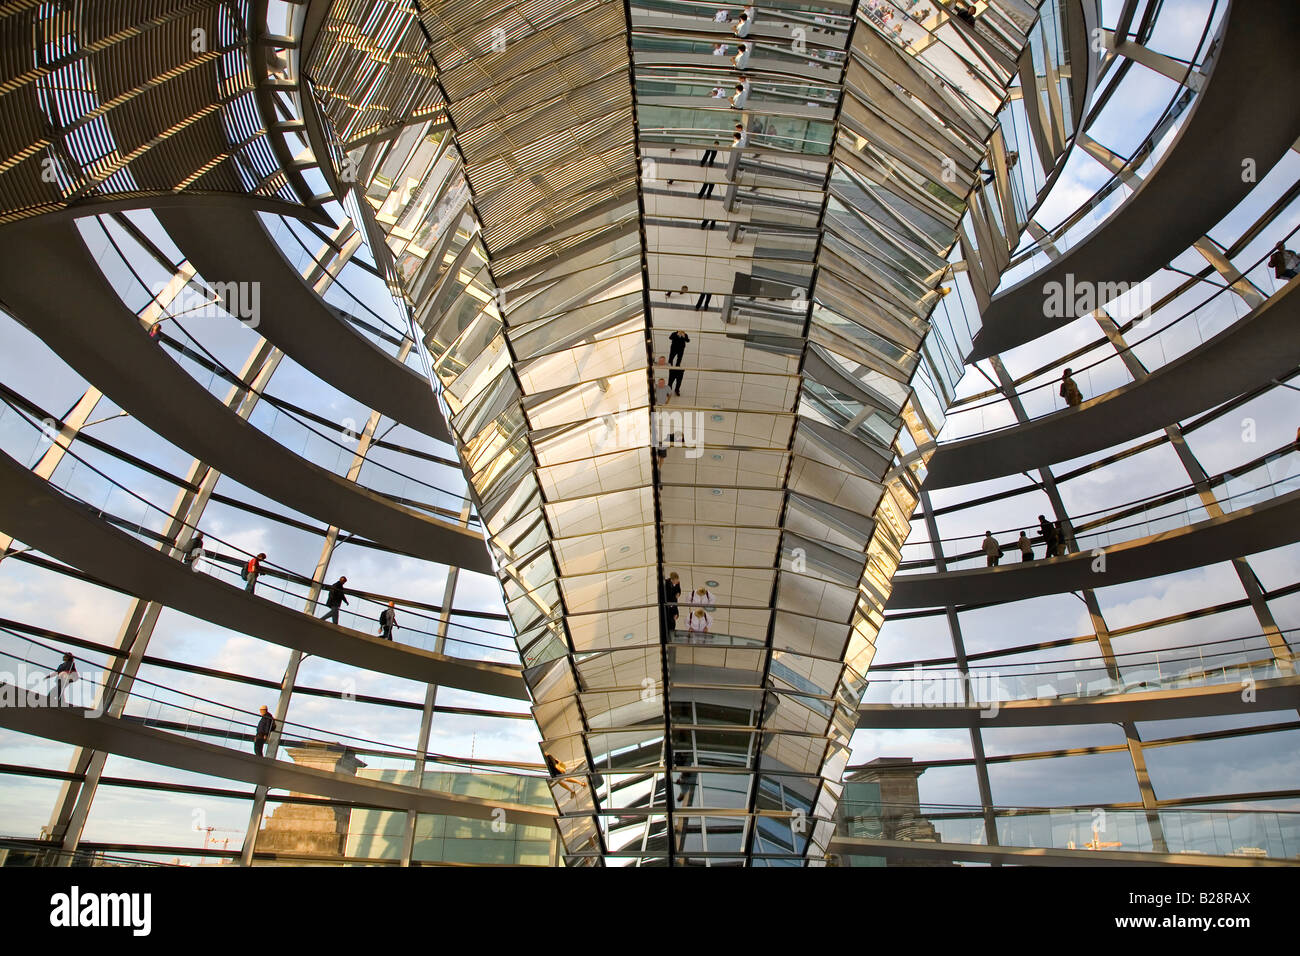 The Reichstag building in Berlin Stock Photo